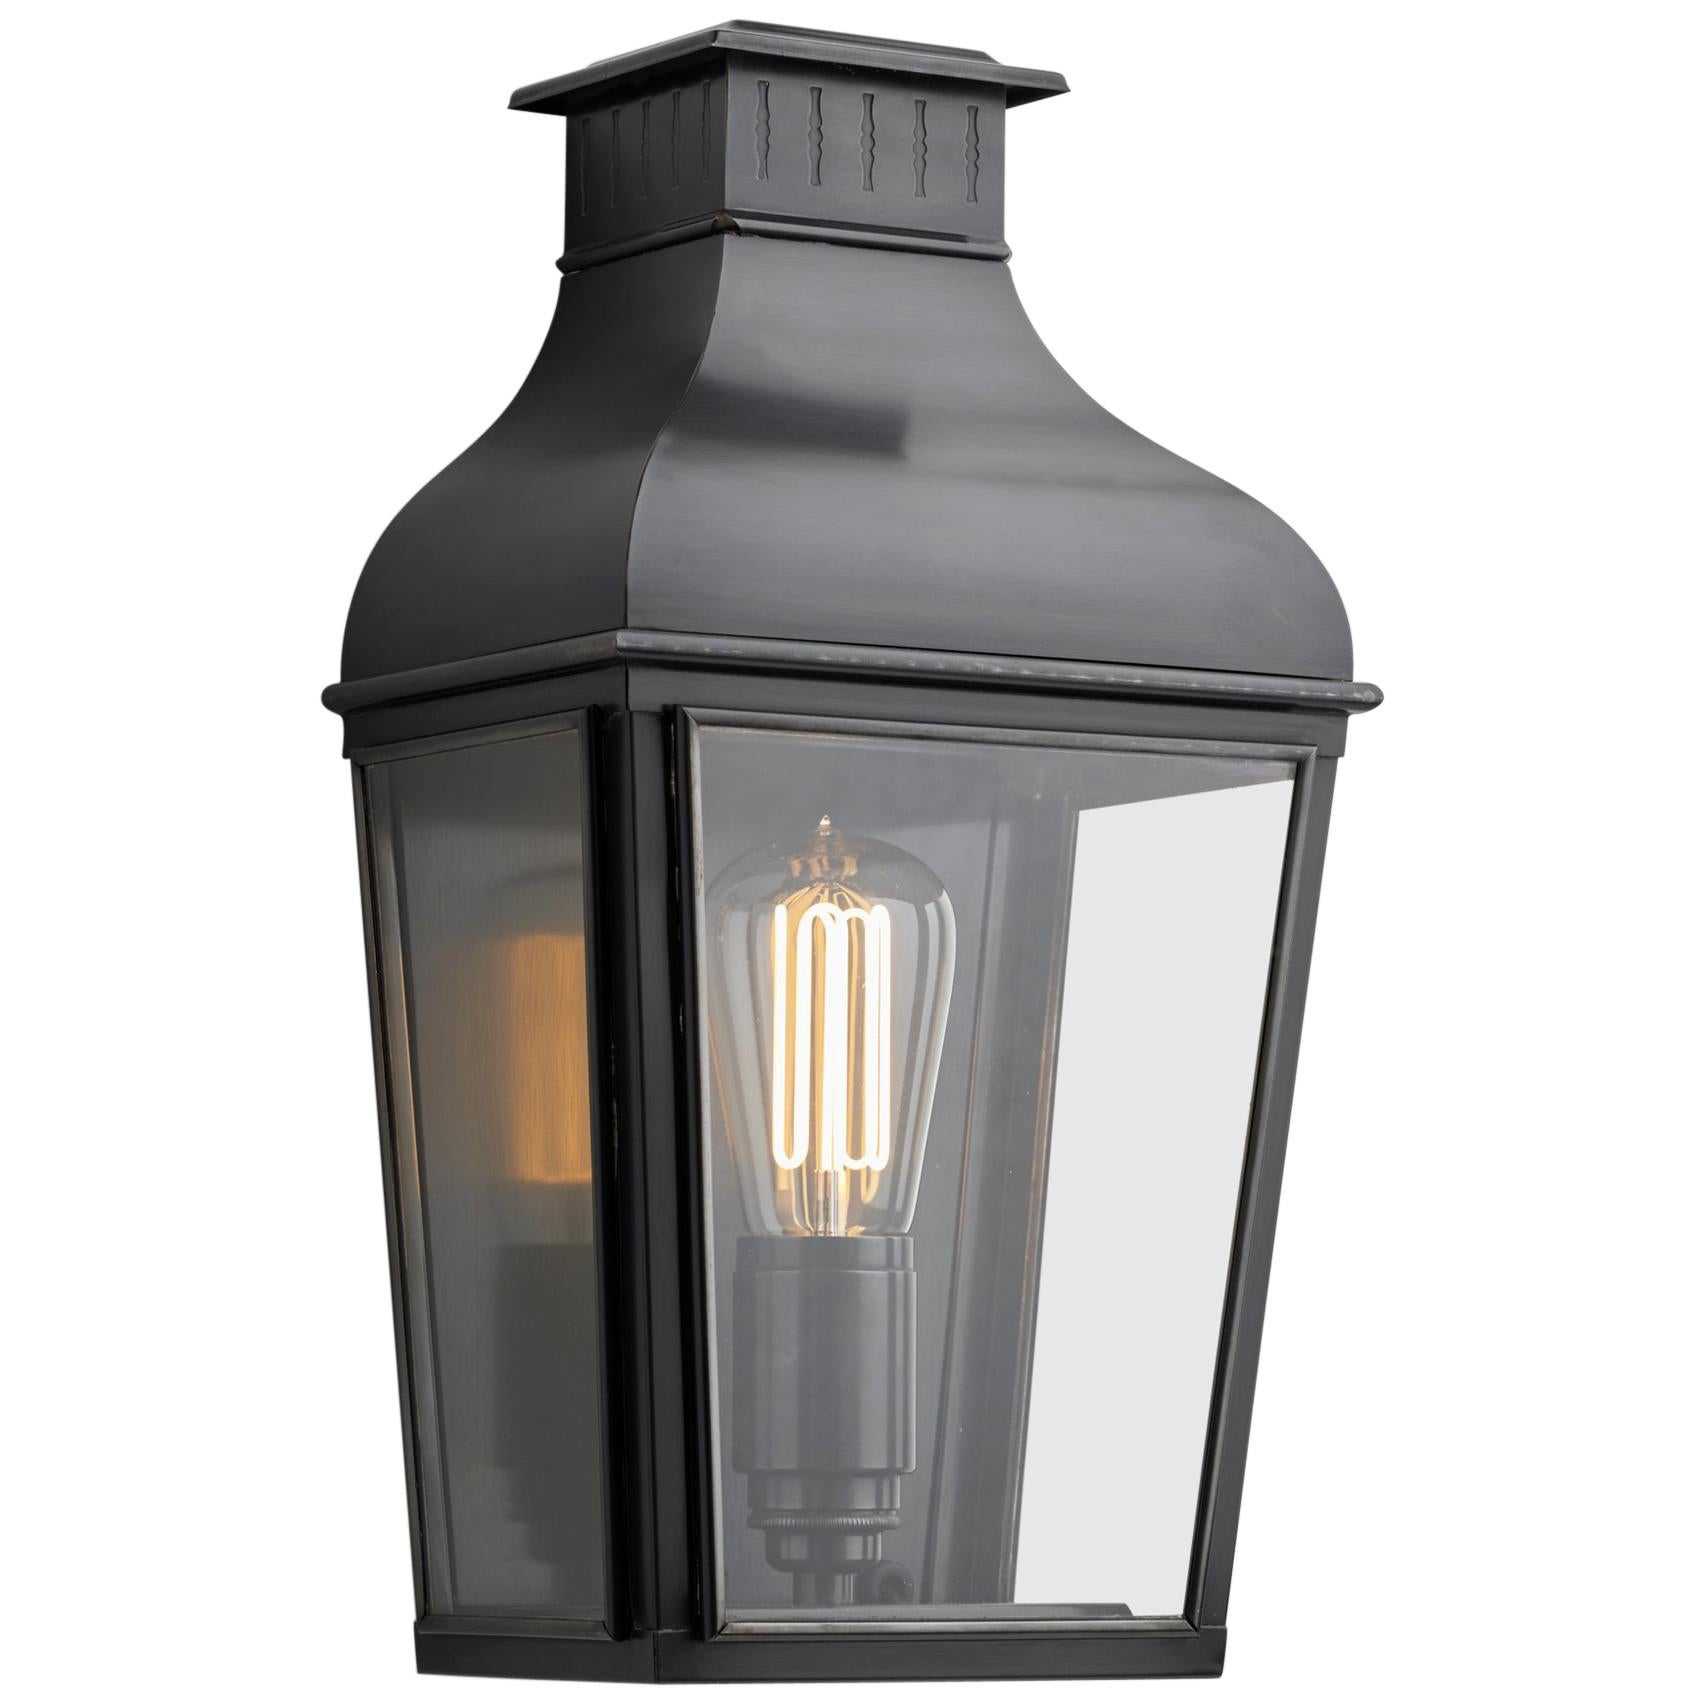 Tekna Montrose City Small-C Wall Light with Dark Bronze Finish and Clear Glass